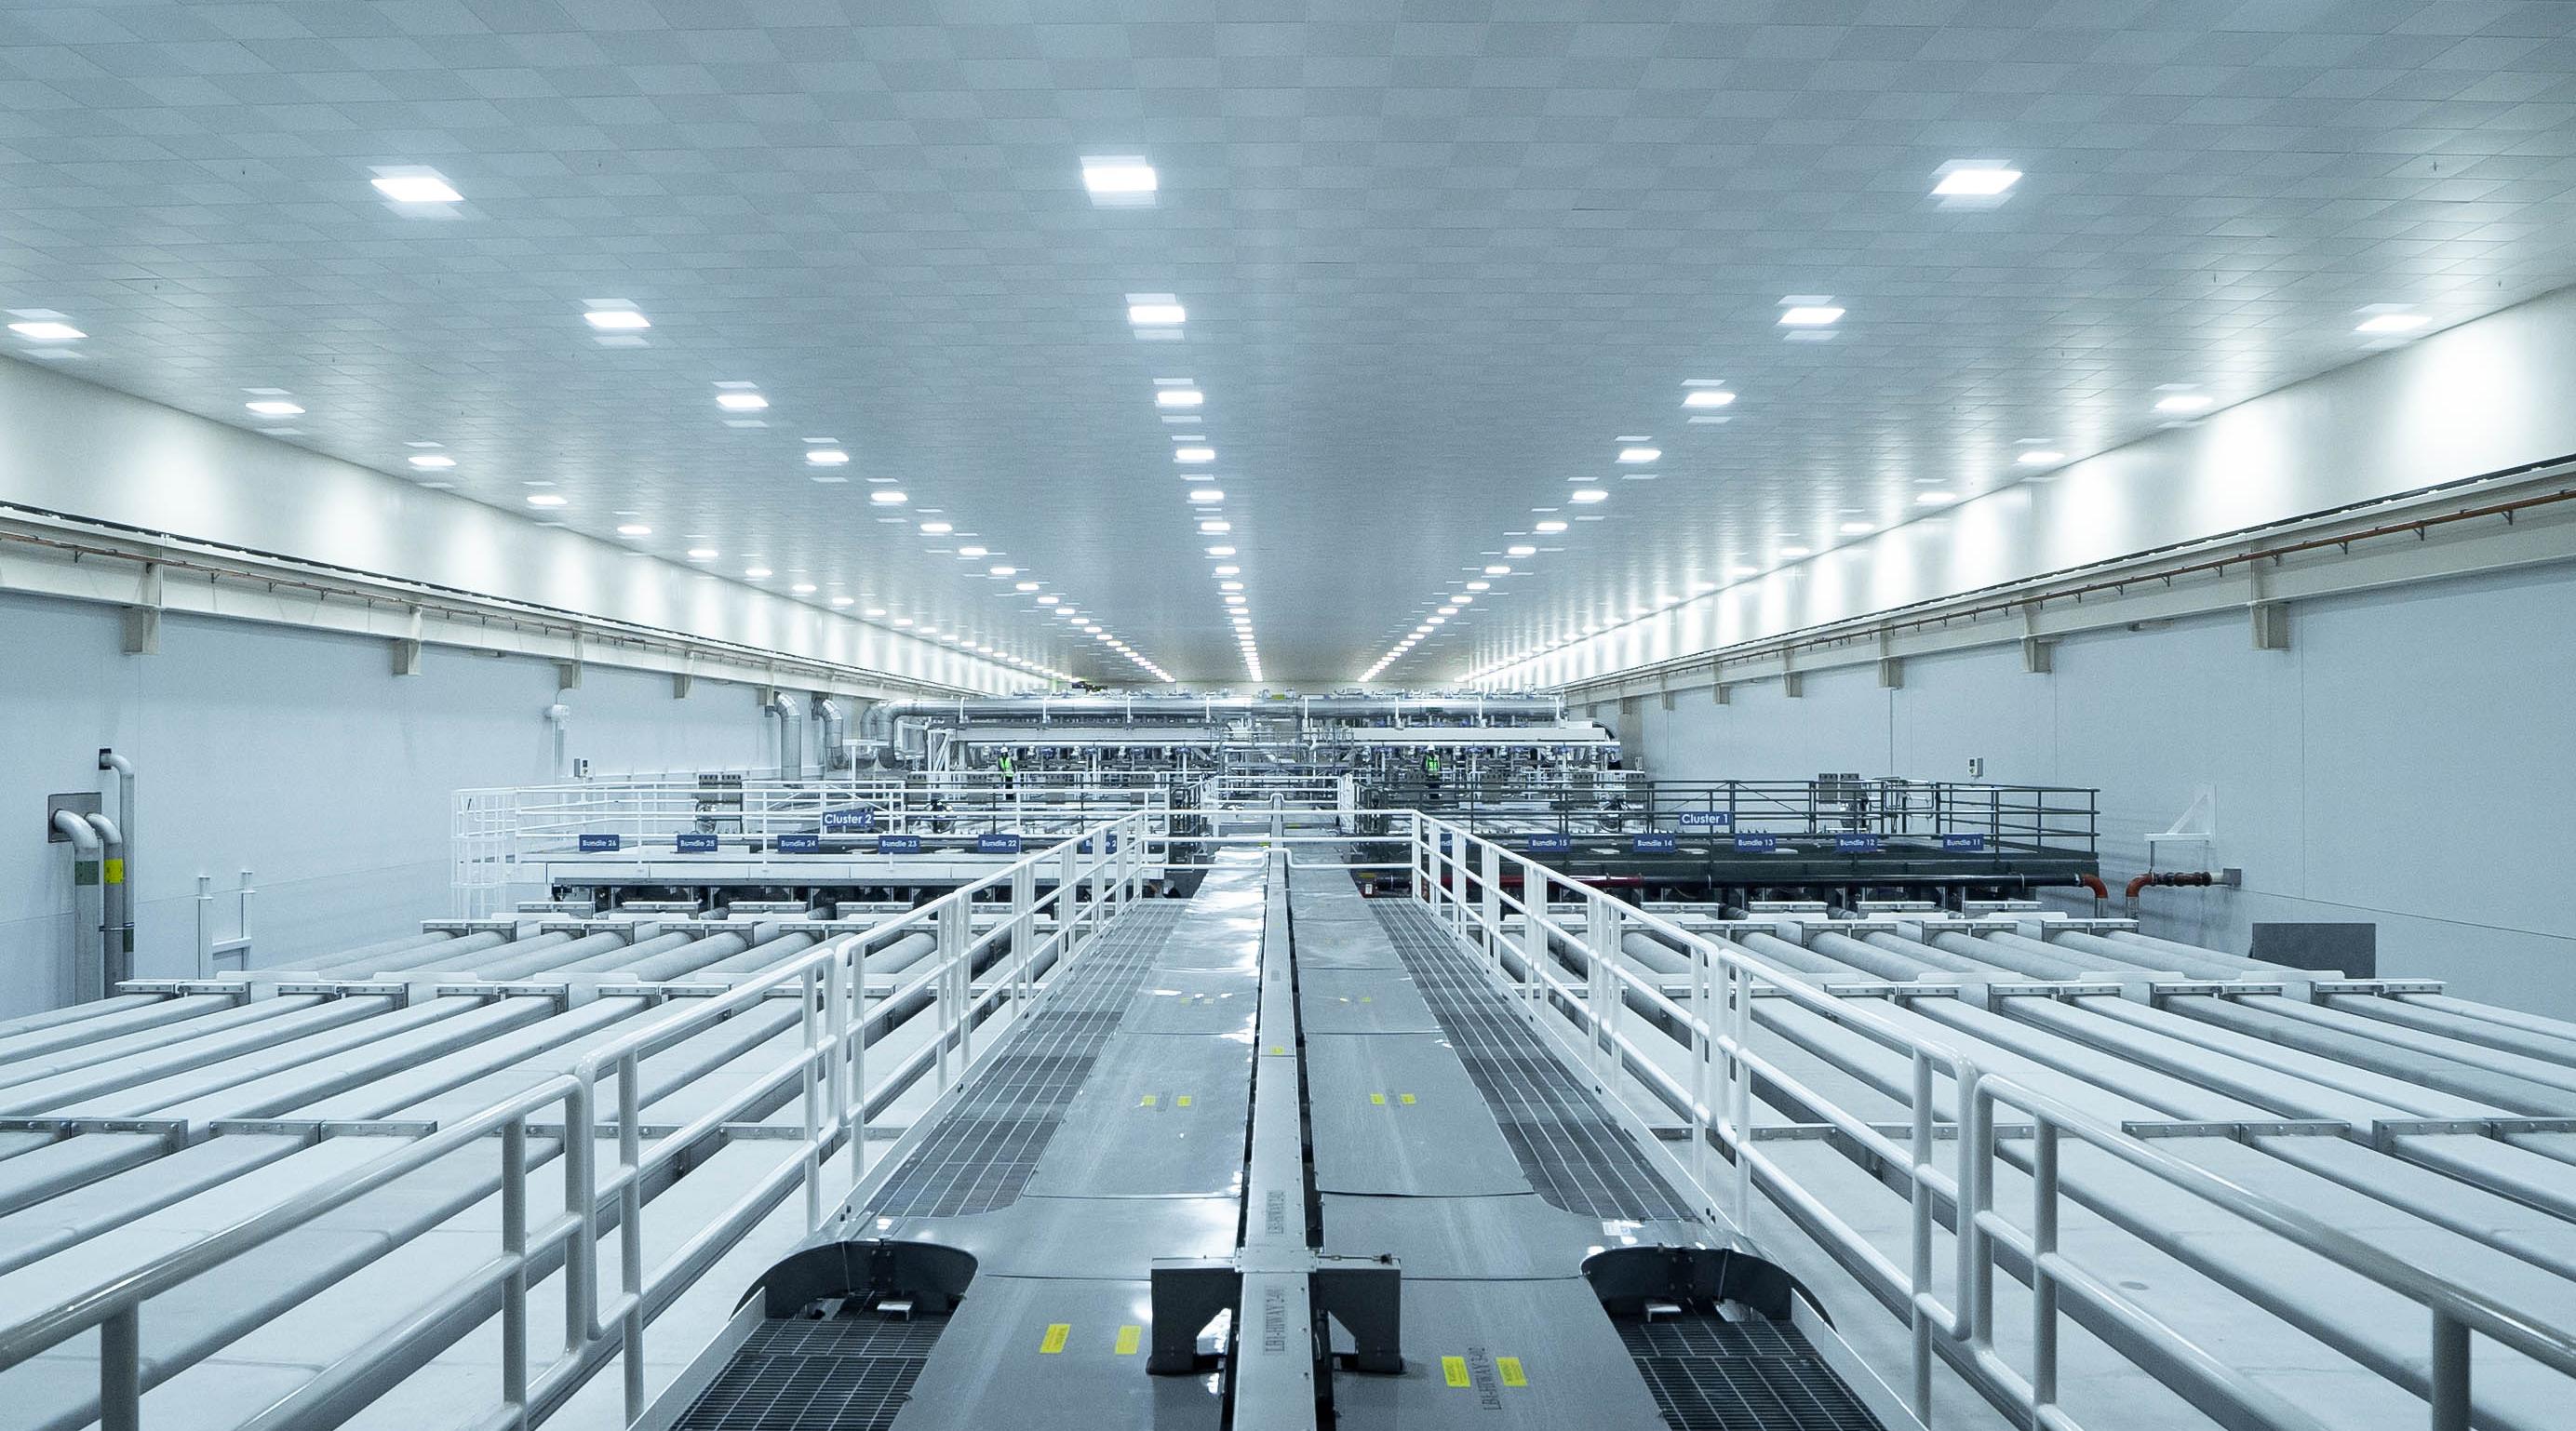 A massive white room with long pipes and walkways extending as far as the eye can see.